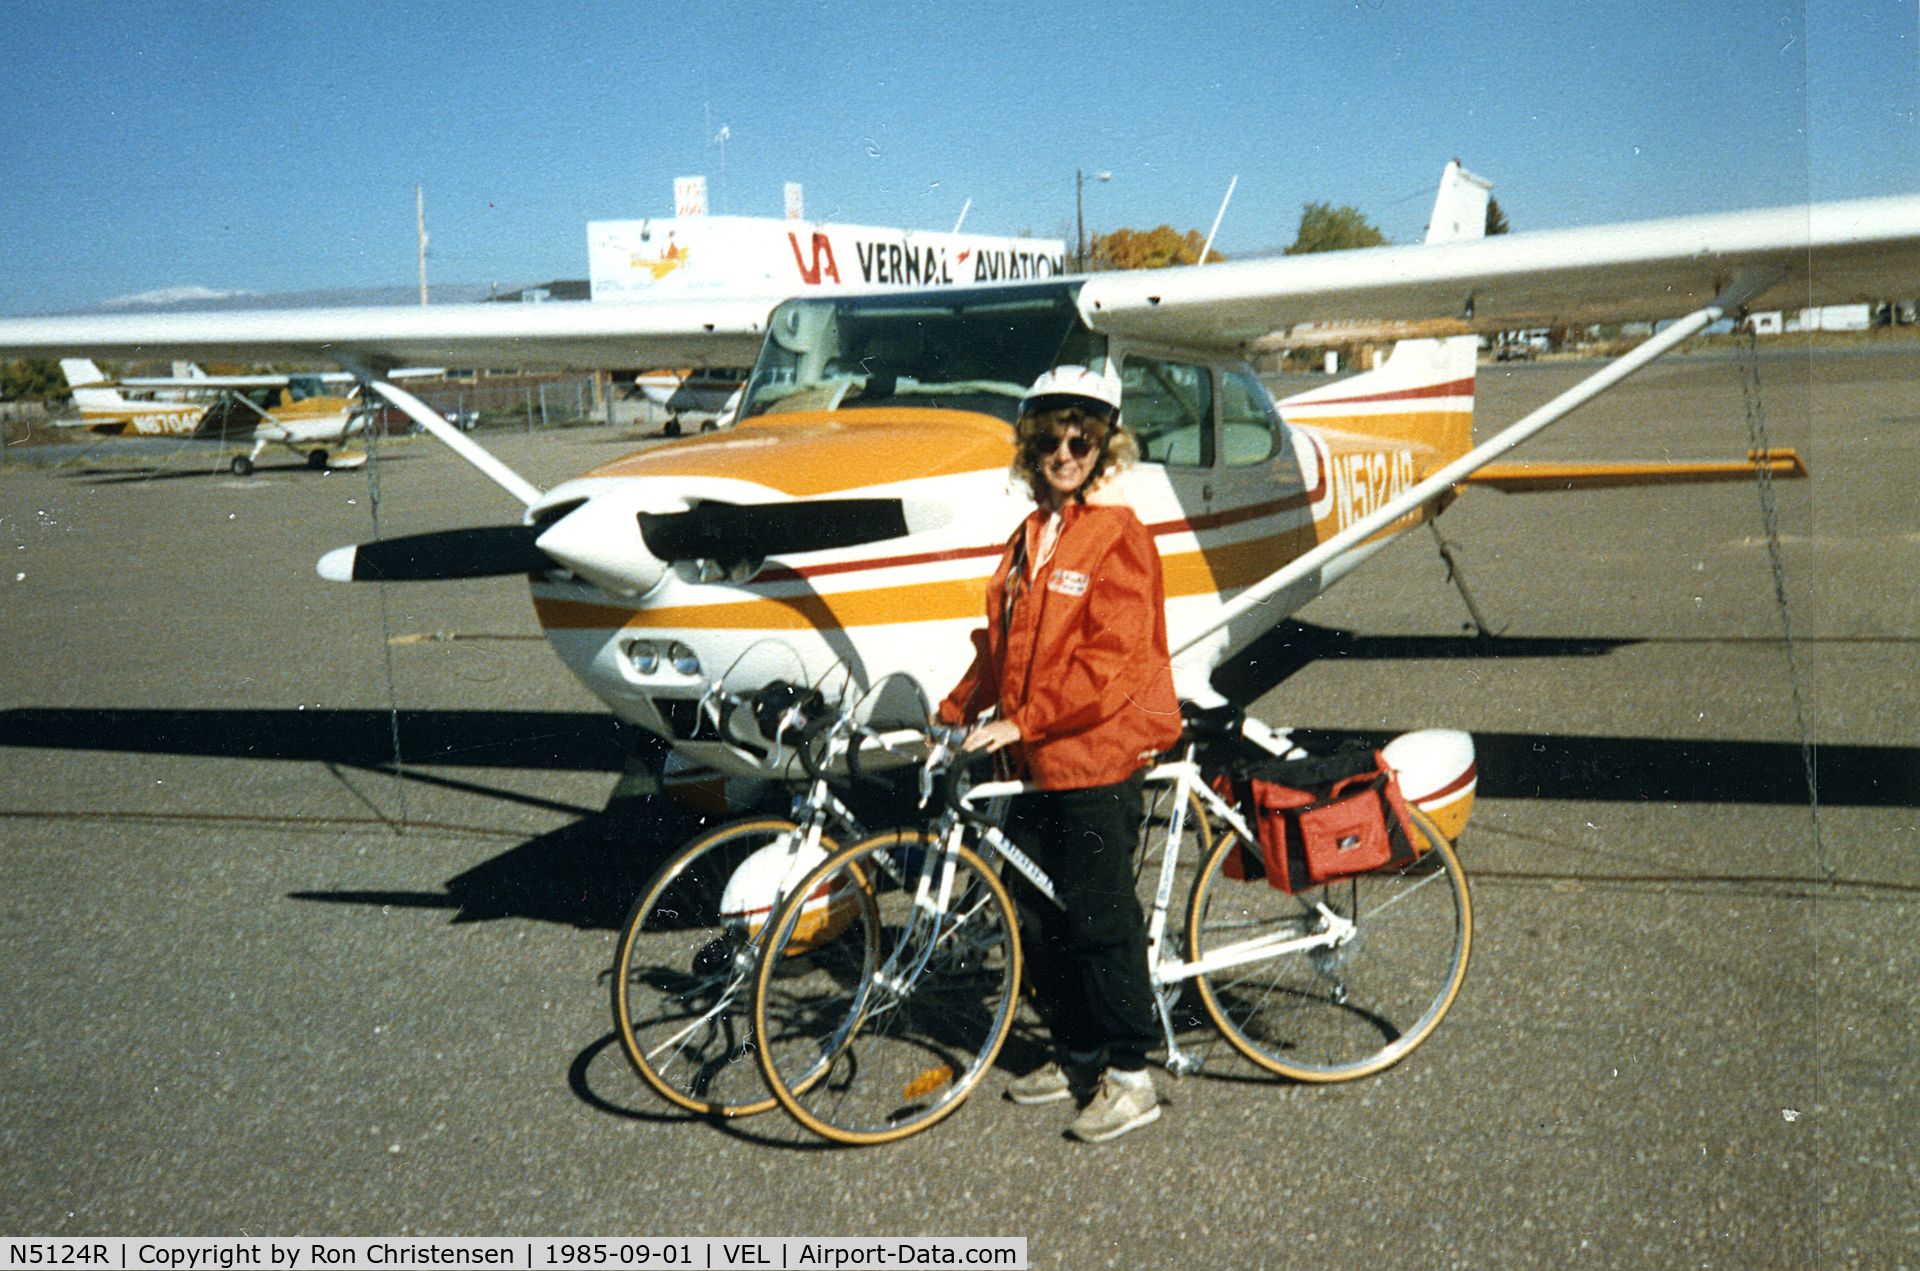 N5124R, 1974 Cessna 172M C/N 17263342, My wife, Ellen and I used 5124R to transport our bicycles to various sites such as Vernal, Utah where we did sight-seeing rides from the airport.  5124R was a wonderful, reliable aircraft!